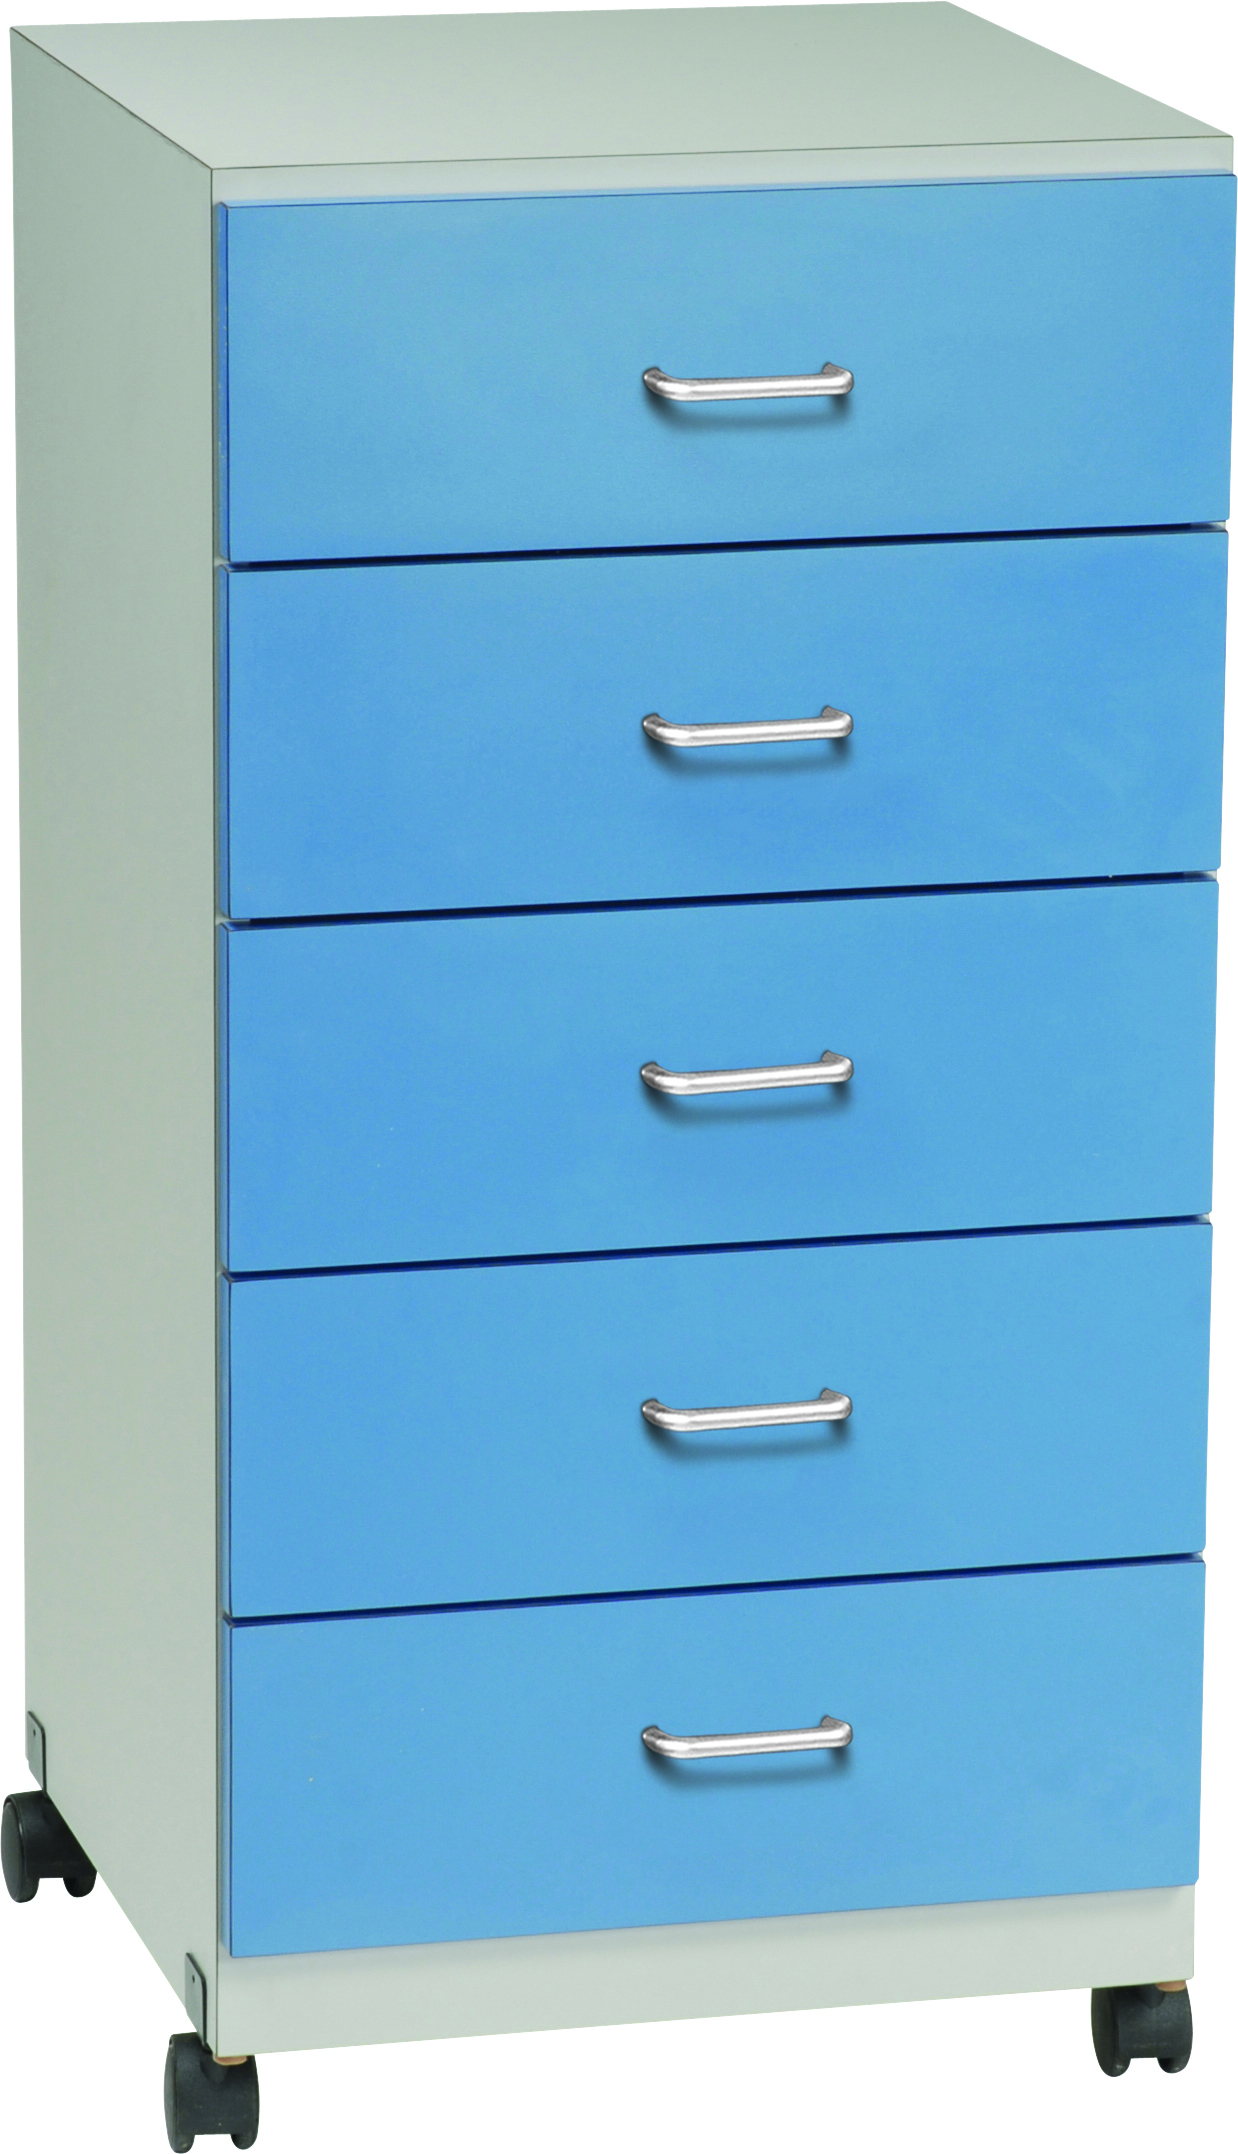 EX5D Series Express Cabinet express supply cabinet, express cabinet.